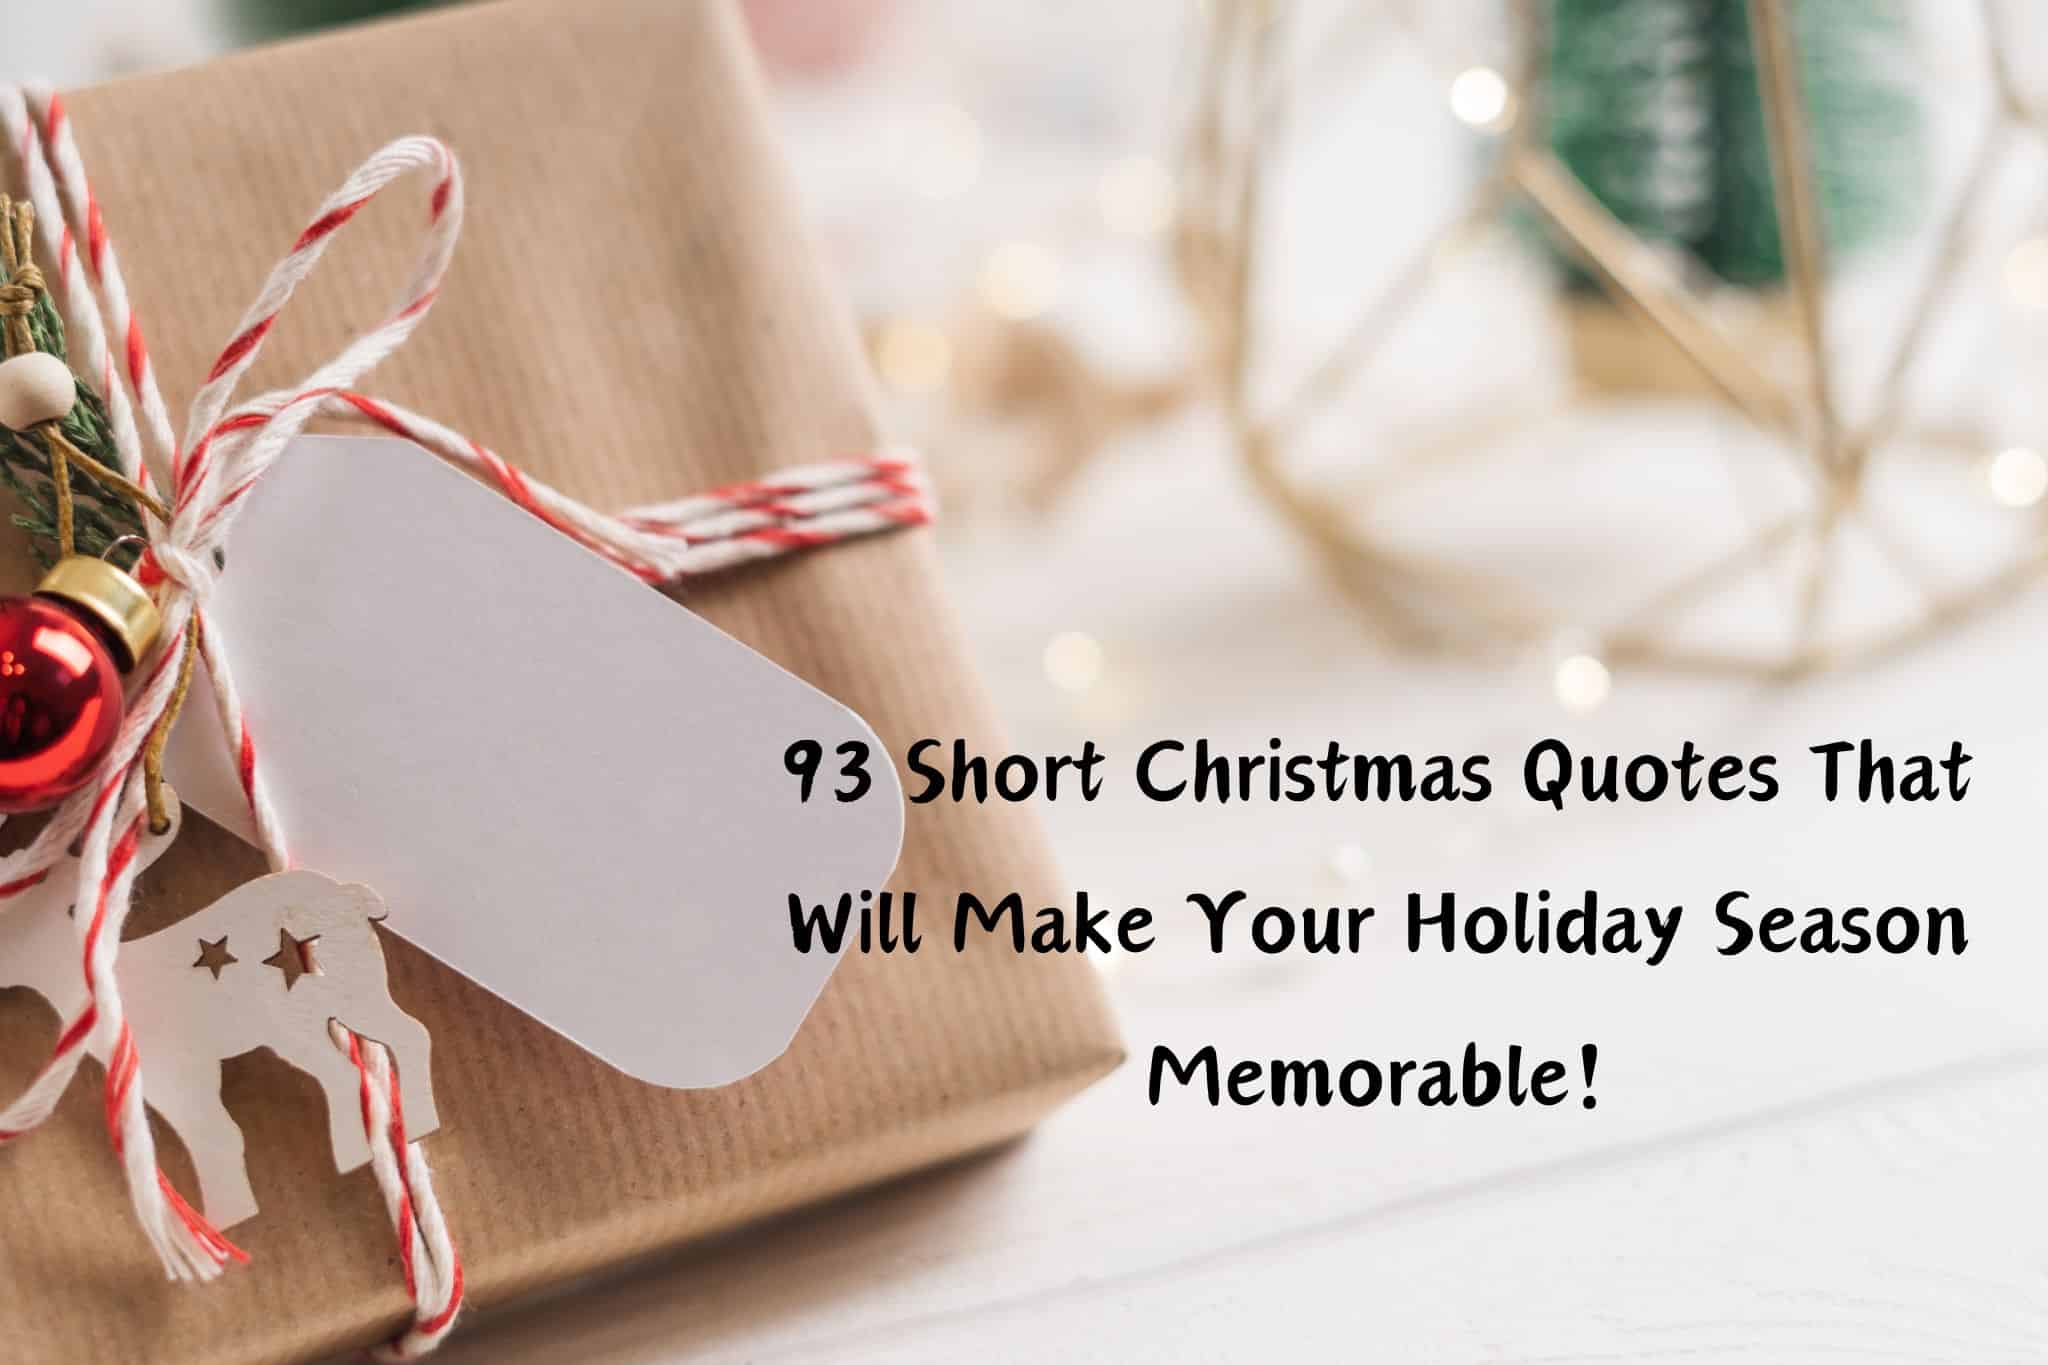 93 short christmas quotes that will make your holiday season memorable!